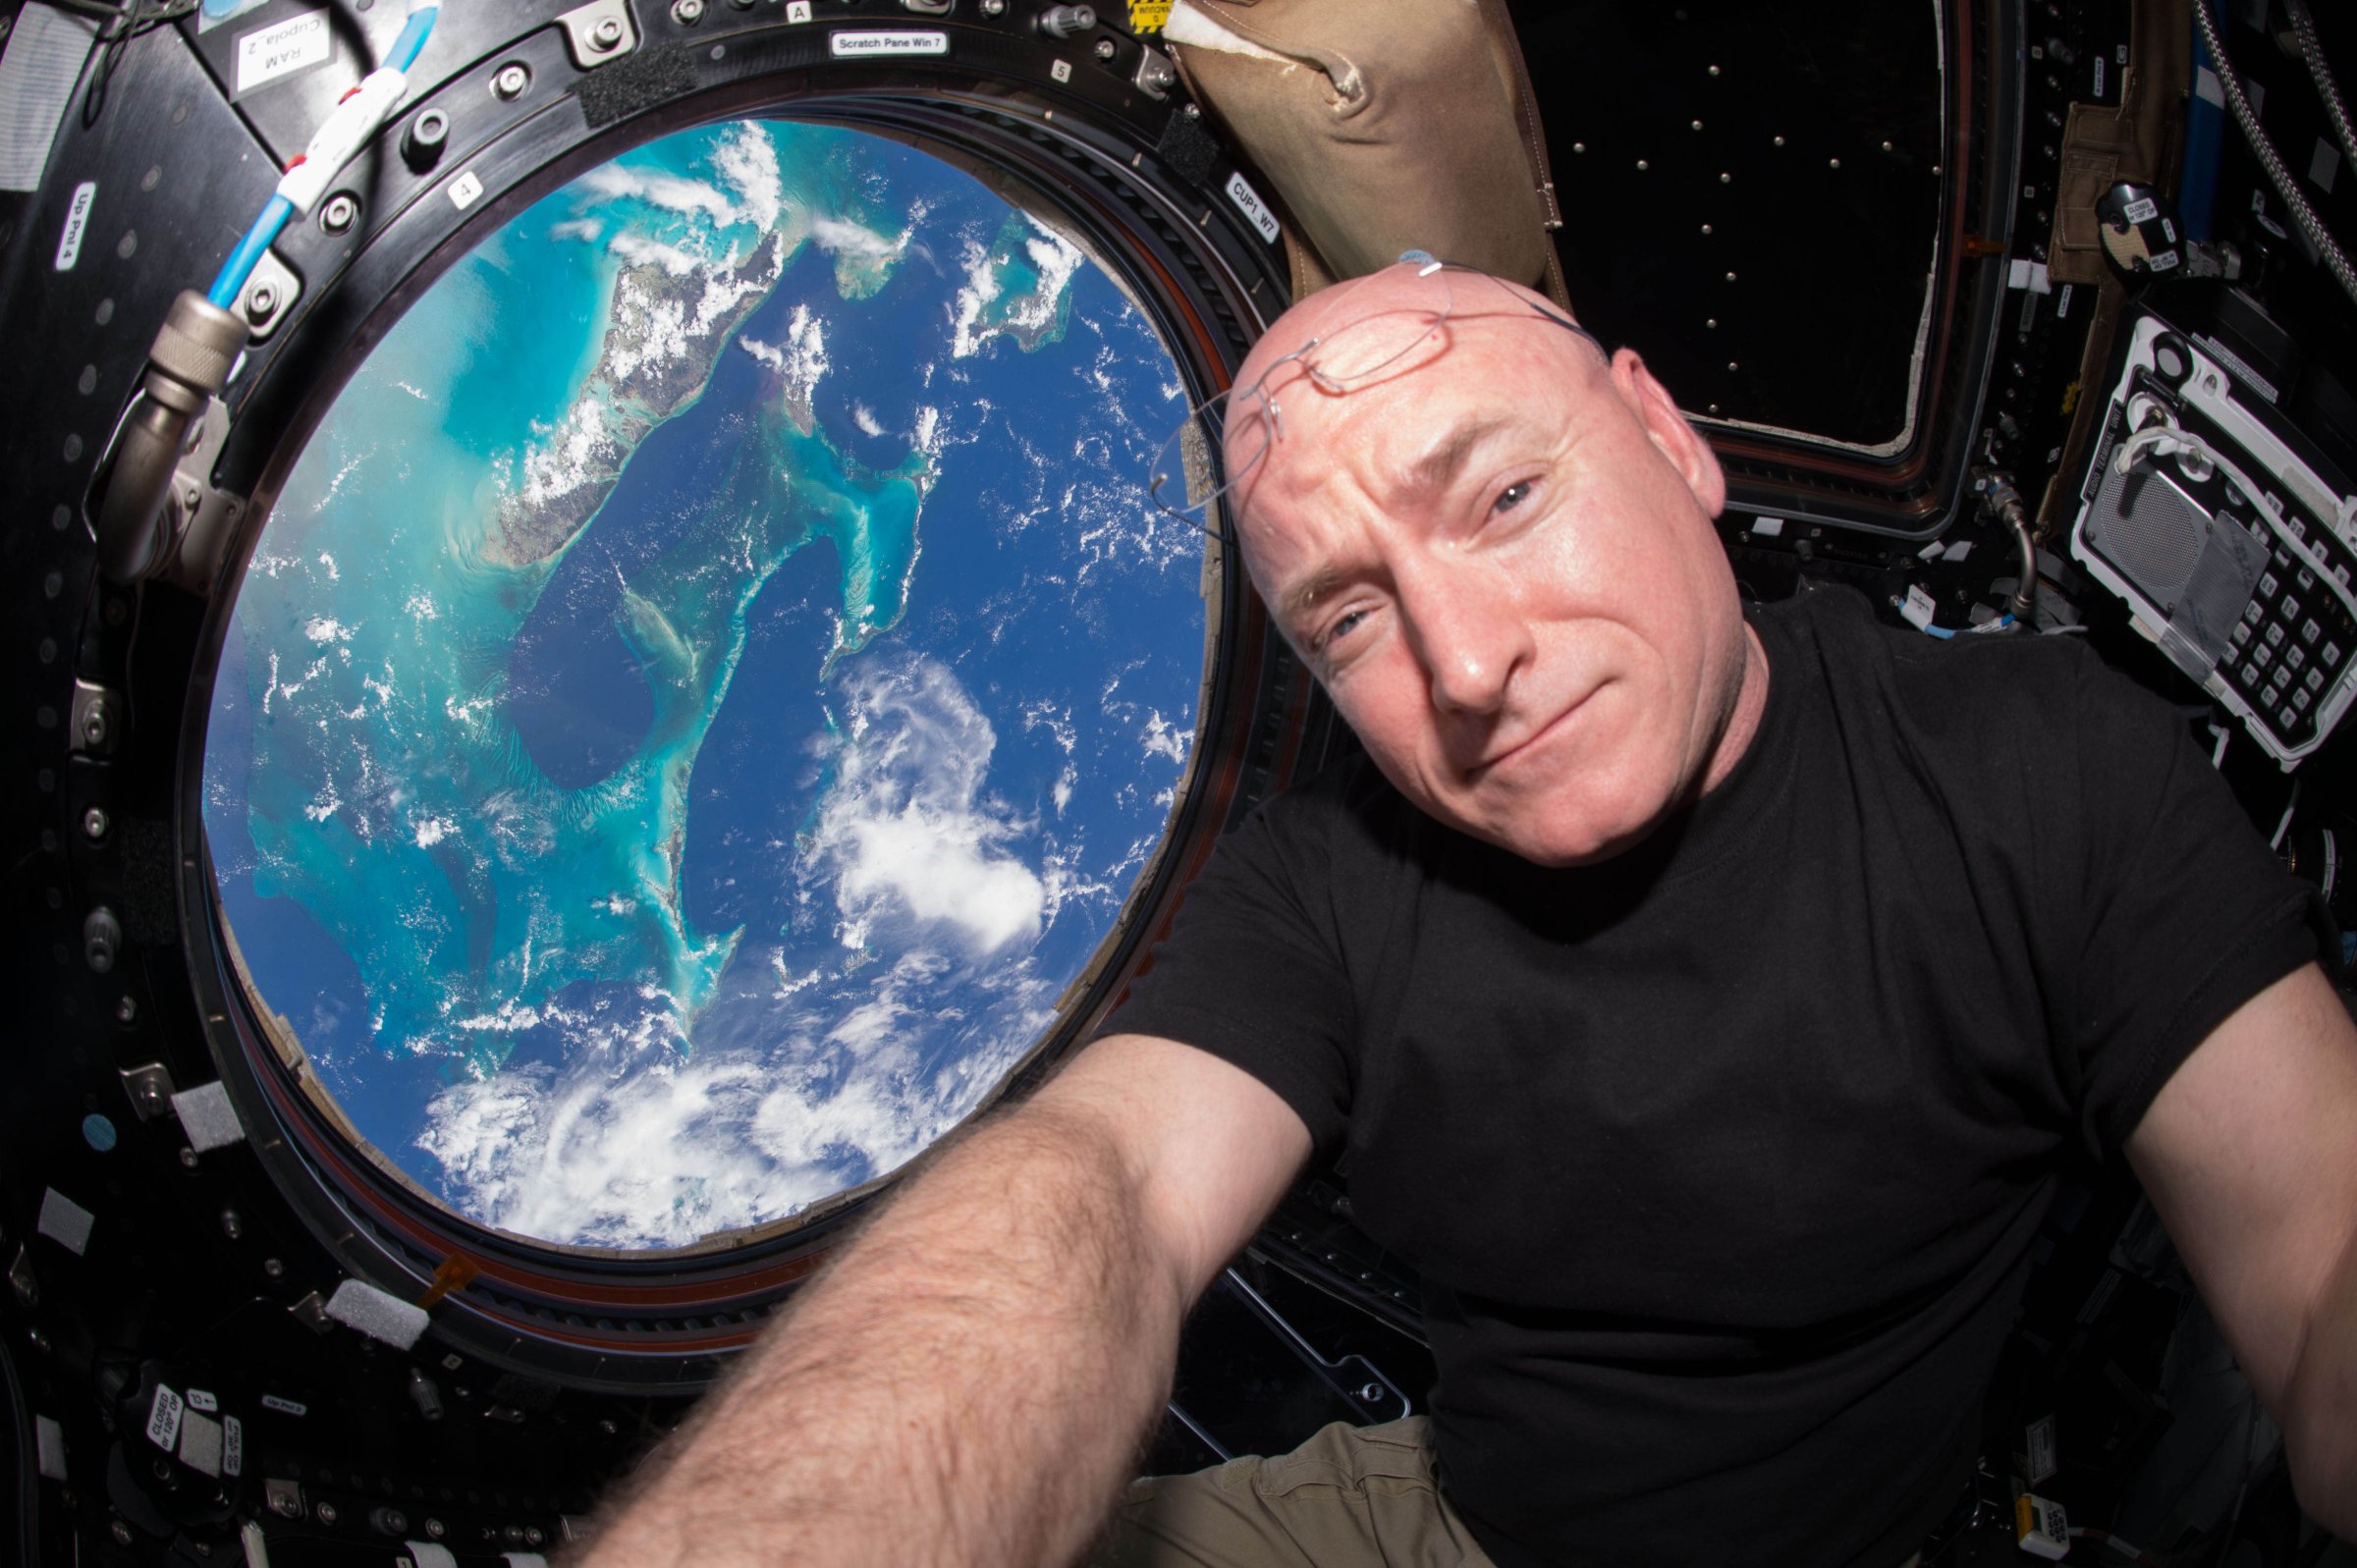 Scott Kelly poses for a selfie photo in the "Cupola" of the International Space Station.